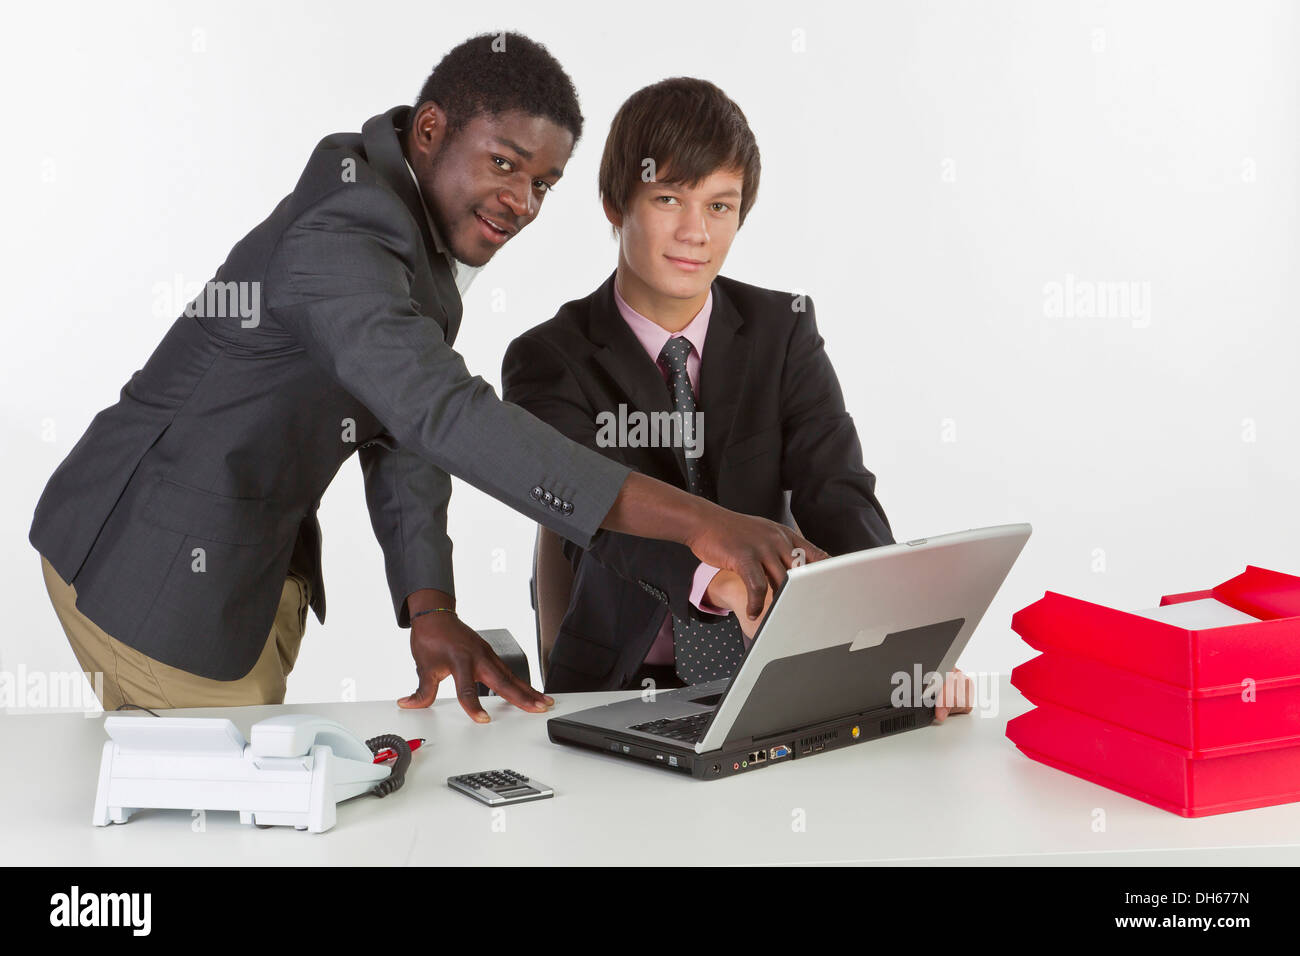 Two young businessmen of different races working on a laptop Stock Photo